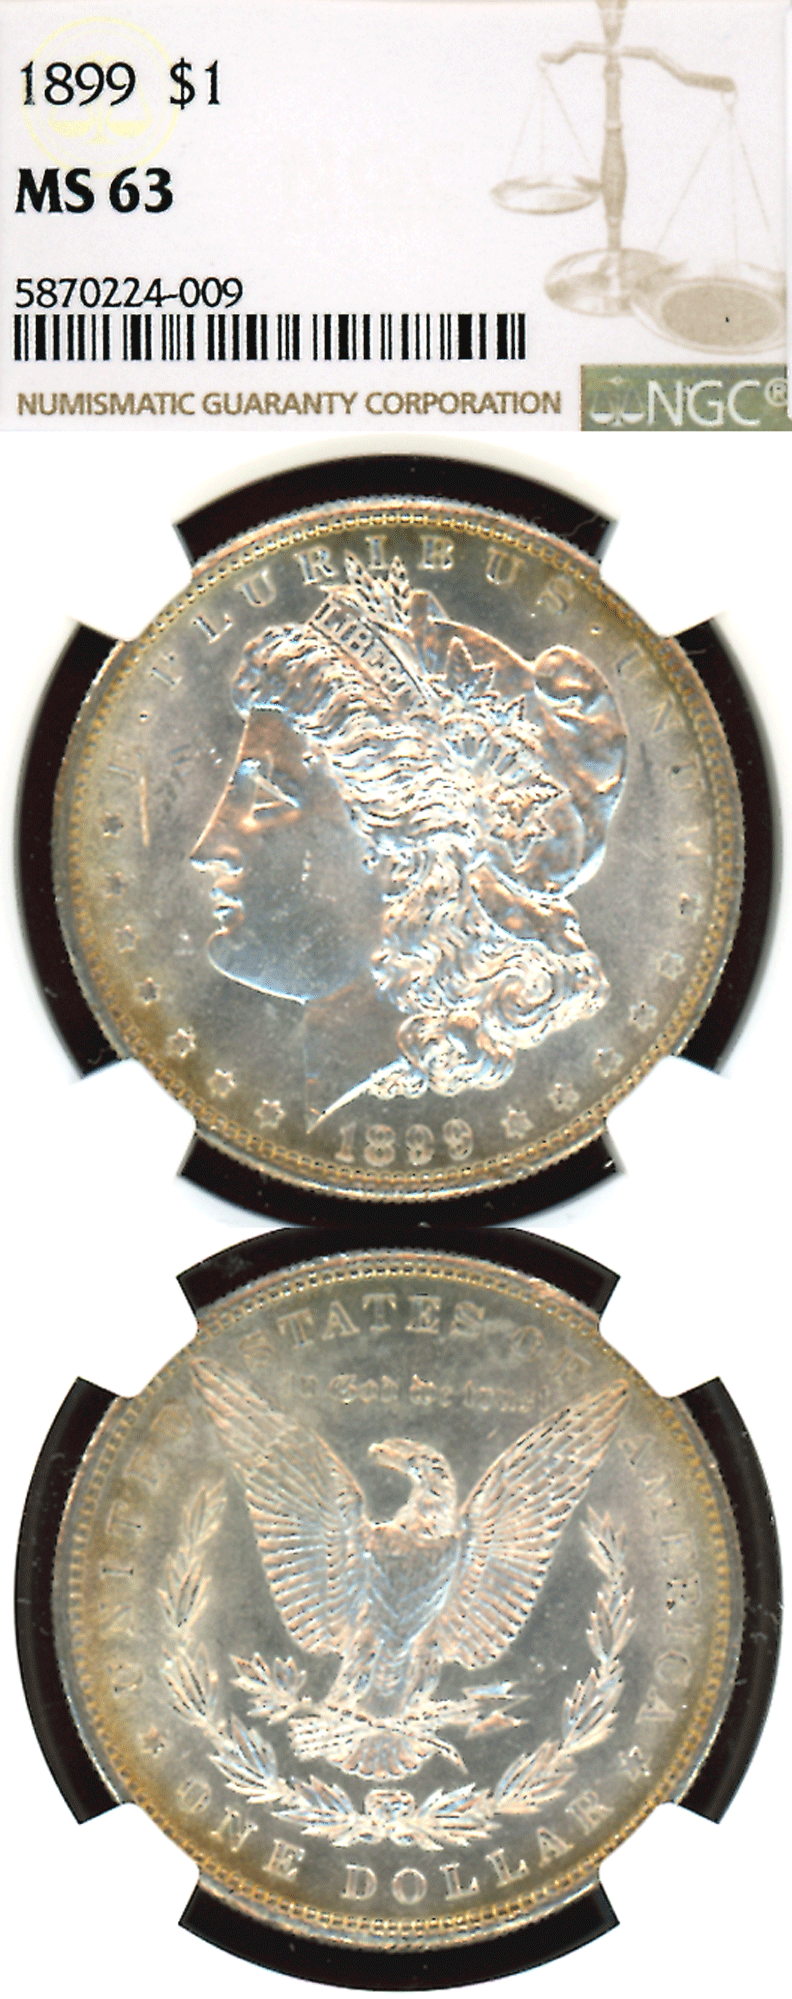 1899 $ MS-63 US Morgan silver dollar NGC Mint State-63